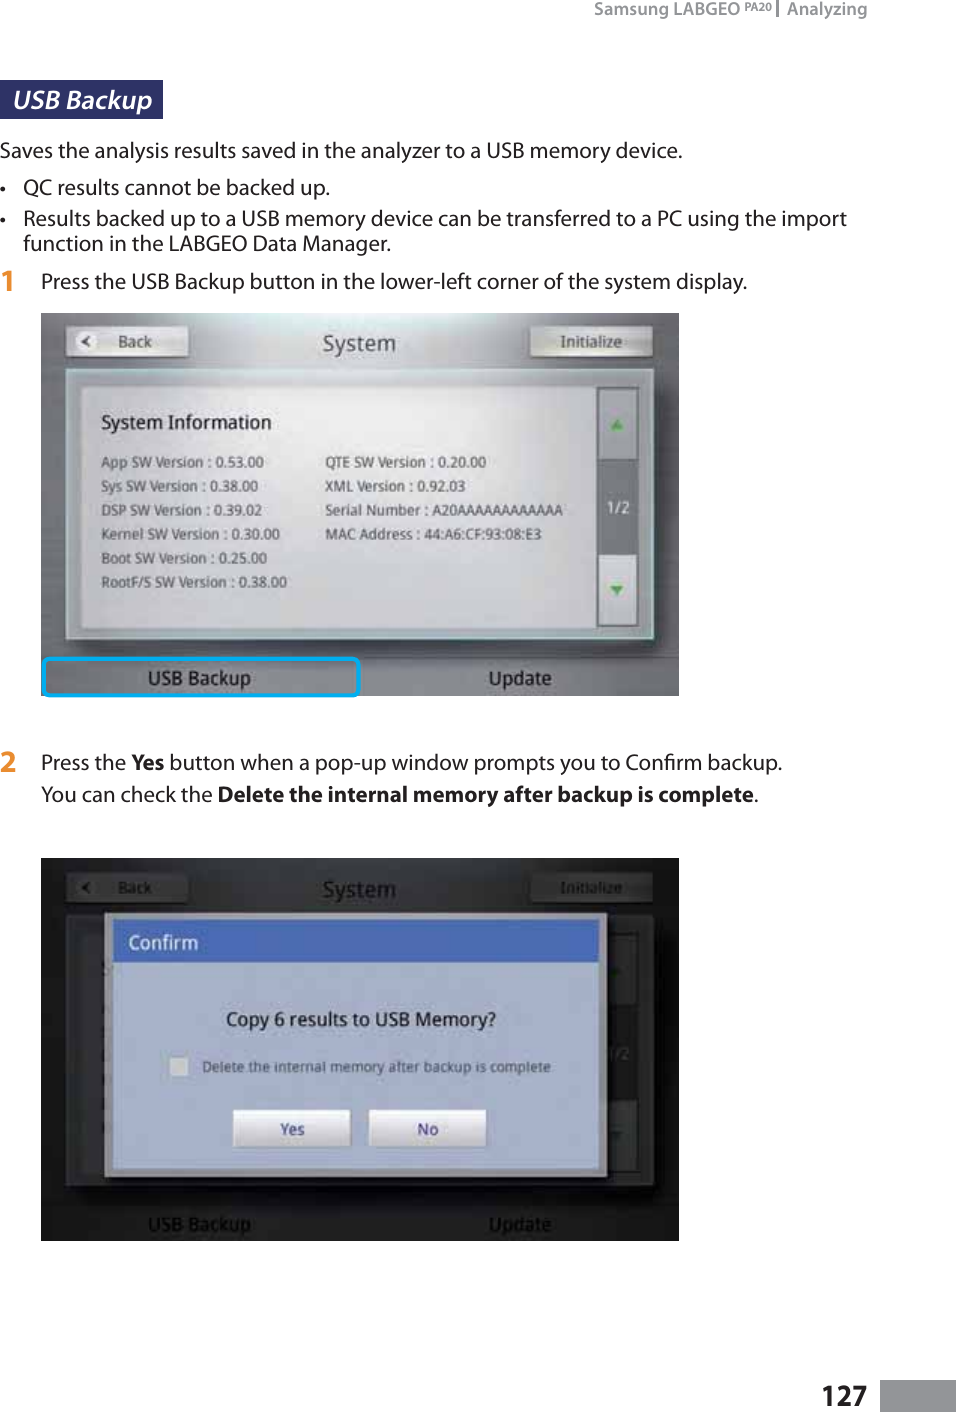 127Samsung LABGEO PA20   AnalyzingUSB Backup Saves the analysis results saved in the analyzer to a USB memory device.t QC results cannot be backed up.t Results backed up to a USB memory device can be transferred to a PC using the import function in the LABGEO Data Manager.1  Press the USB Backup button in the lower-left corner of the system display.2  Press the Yes button when a pop-up window prompts you to Conrm backup.You can check the Delete the internal memory after backup is complete.